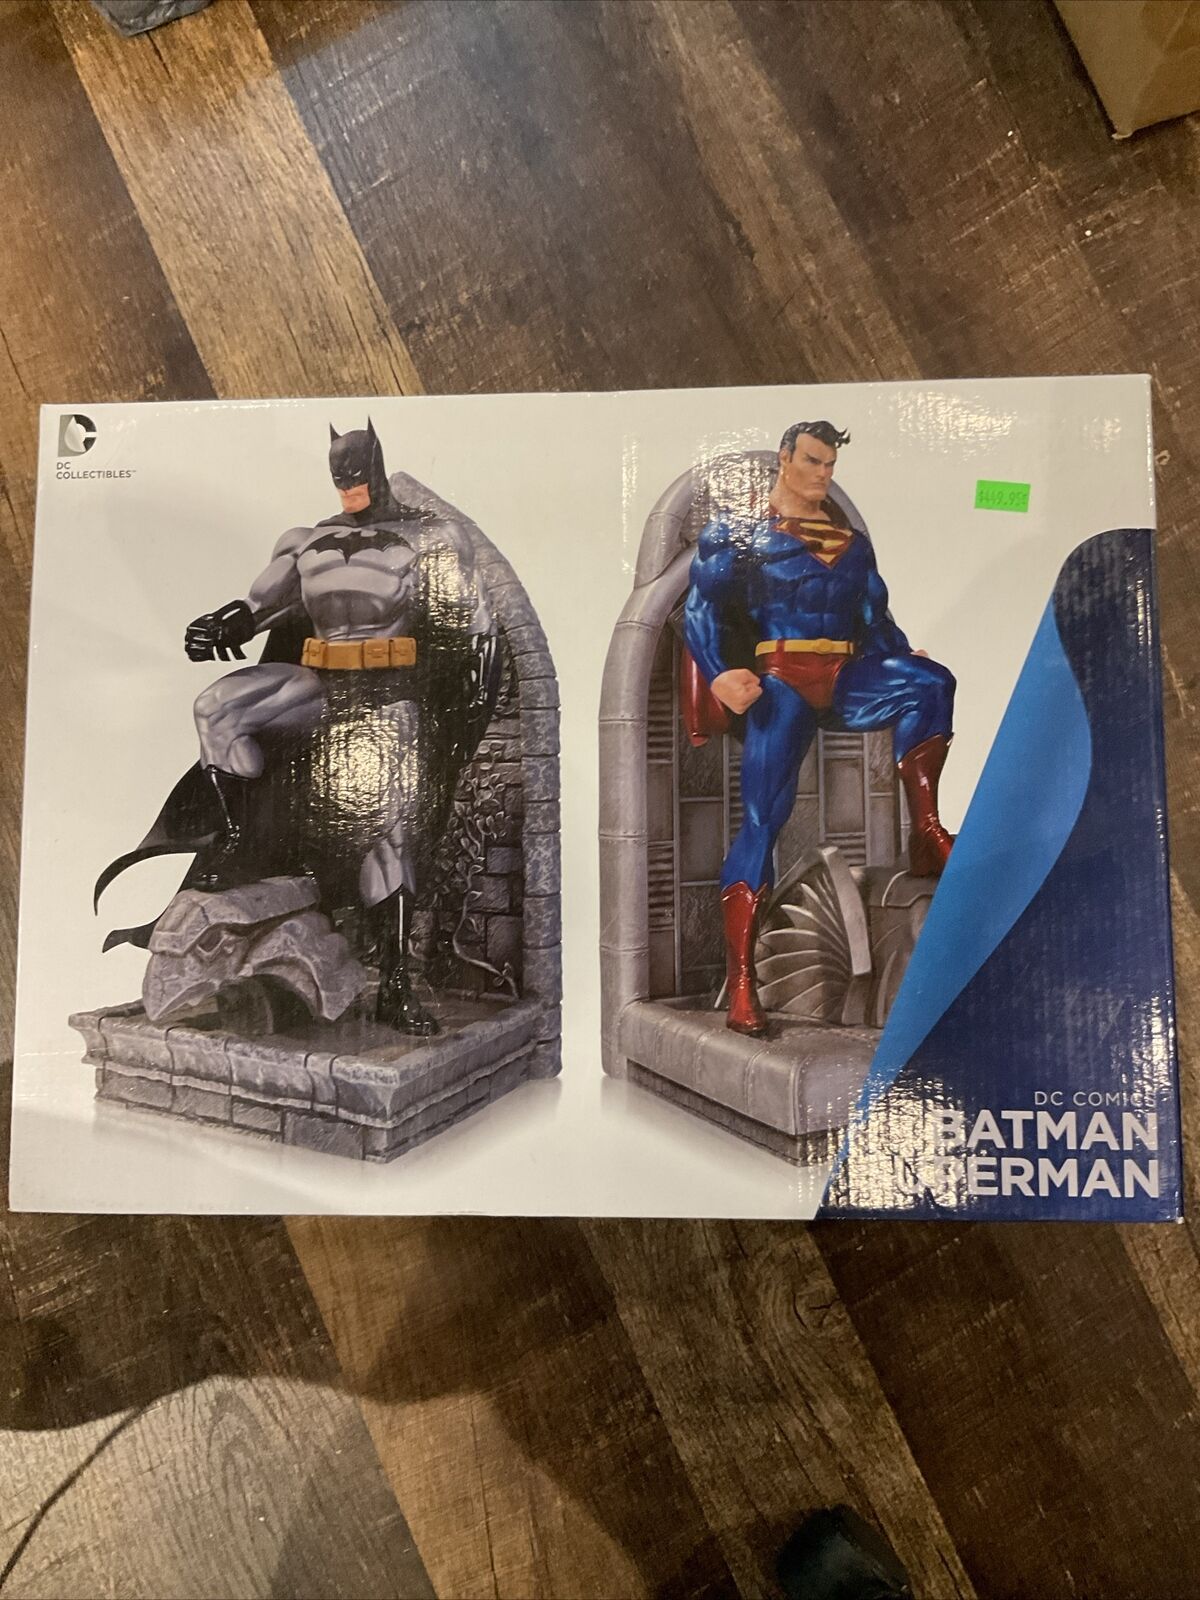 DC Comics Superman and Batman Resin Bookends Brand New (Opened To Check Quality)